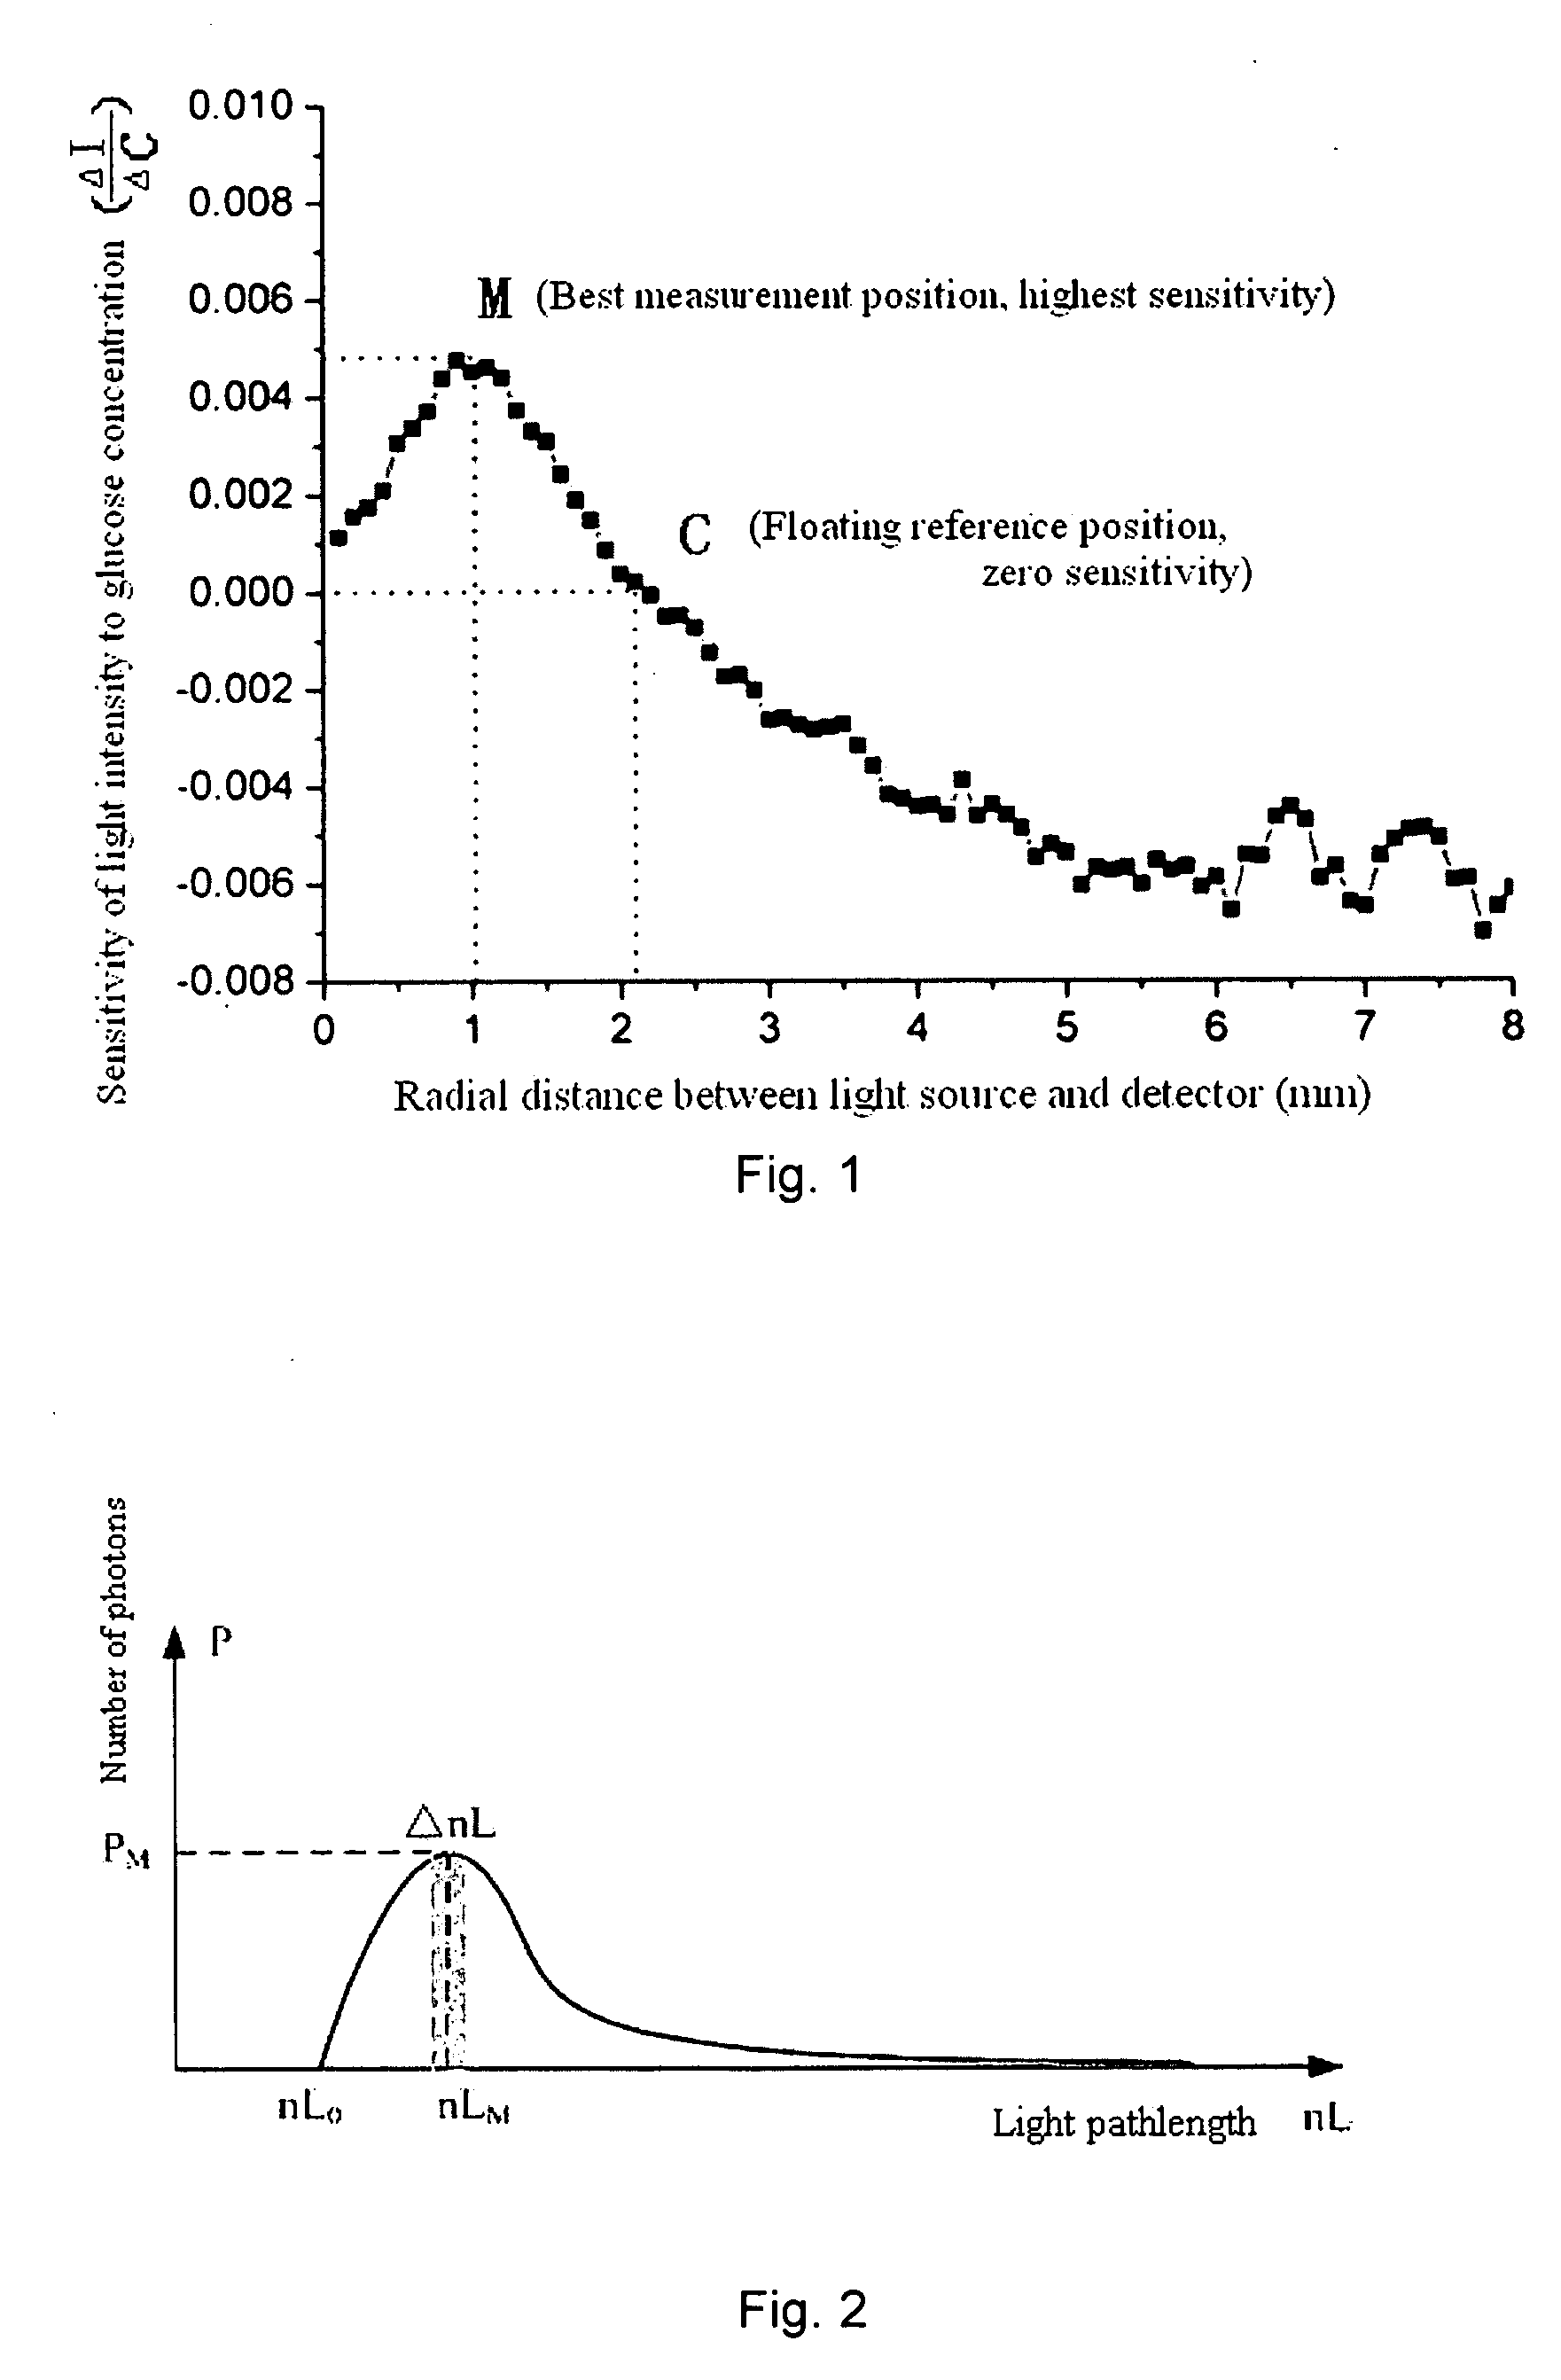 Apparatus and method for noninvasive human component measurement with optional optical length